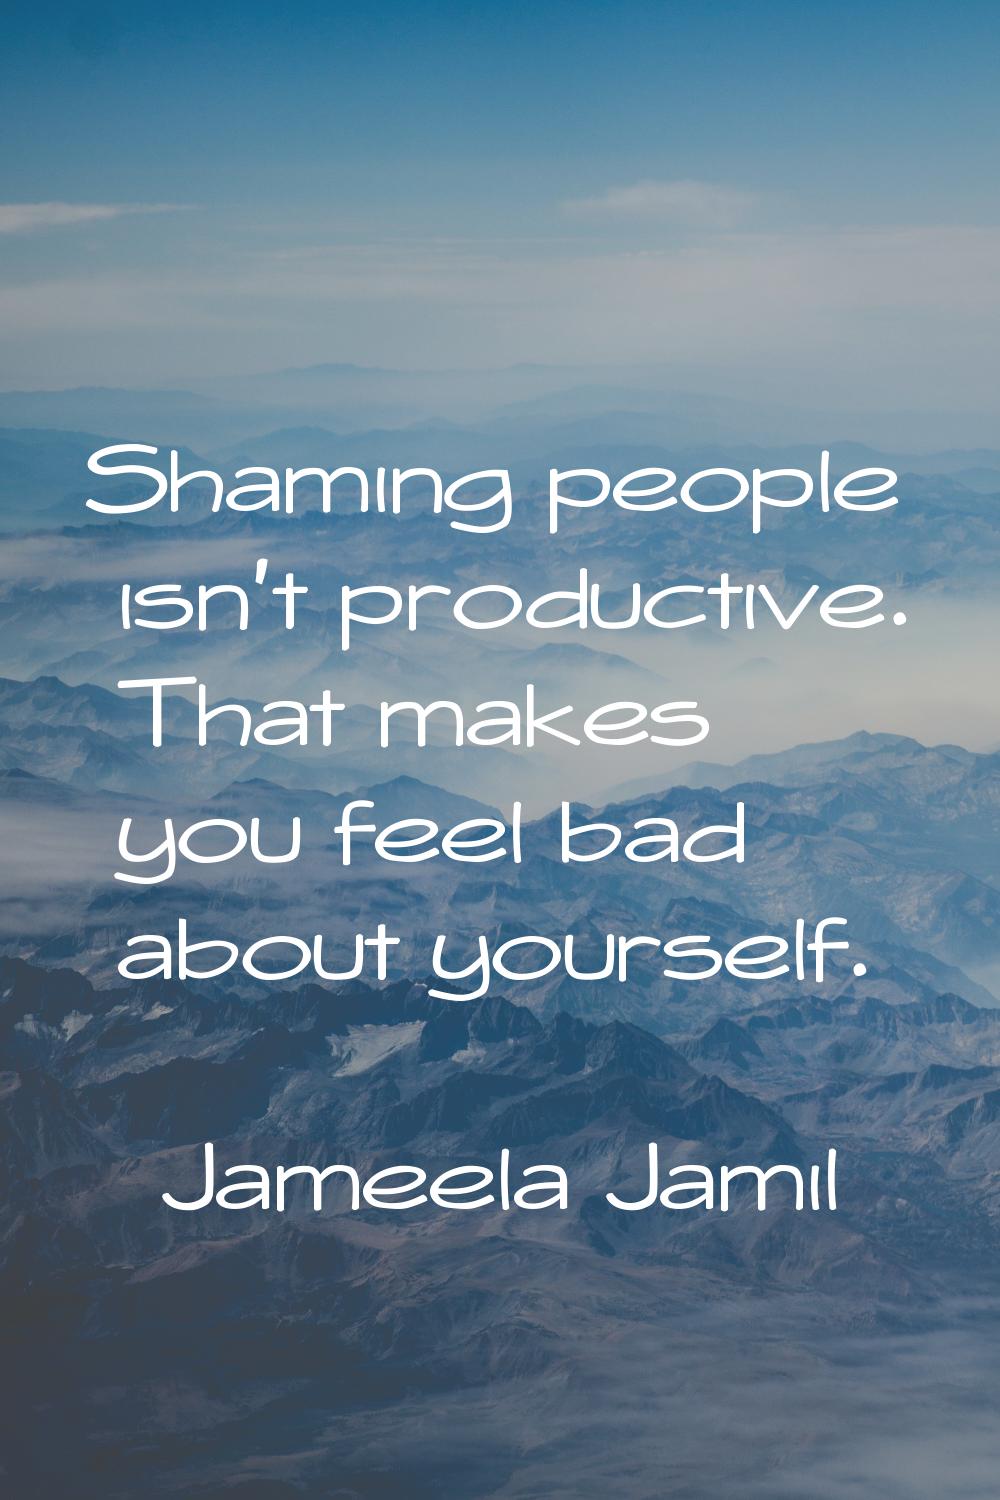 Shaming people isn't productive. That makes you feel bad about yourself.